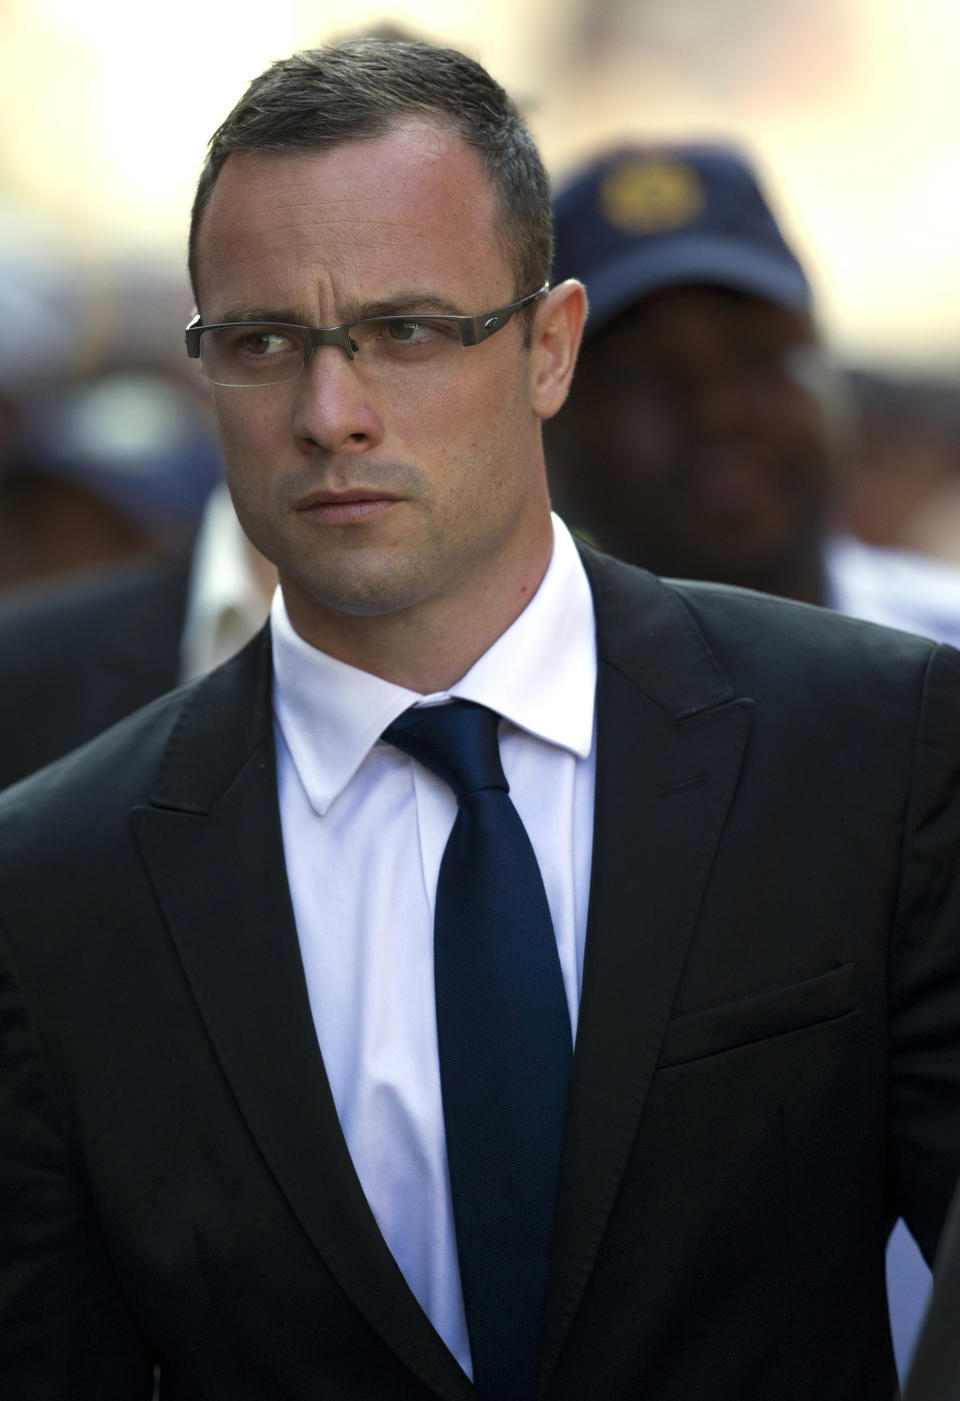 Oscar Pistorius arrives at the high court for his murder trial in Pretoria, South Africa, Monday, March 17, 2014. Pistorius is charged with murder for the shooting death of his girlfriend, Reeva Steenkamp, on Valentines Day in 2013. (AP Photo/Themba Hadebe)